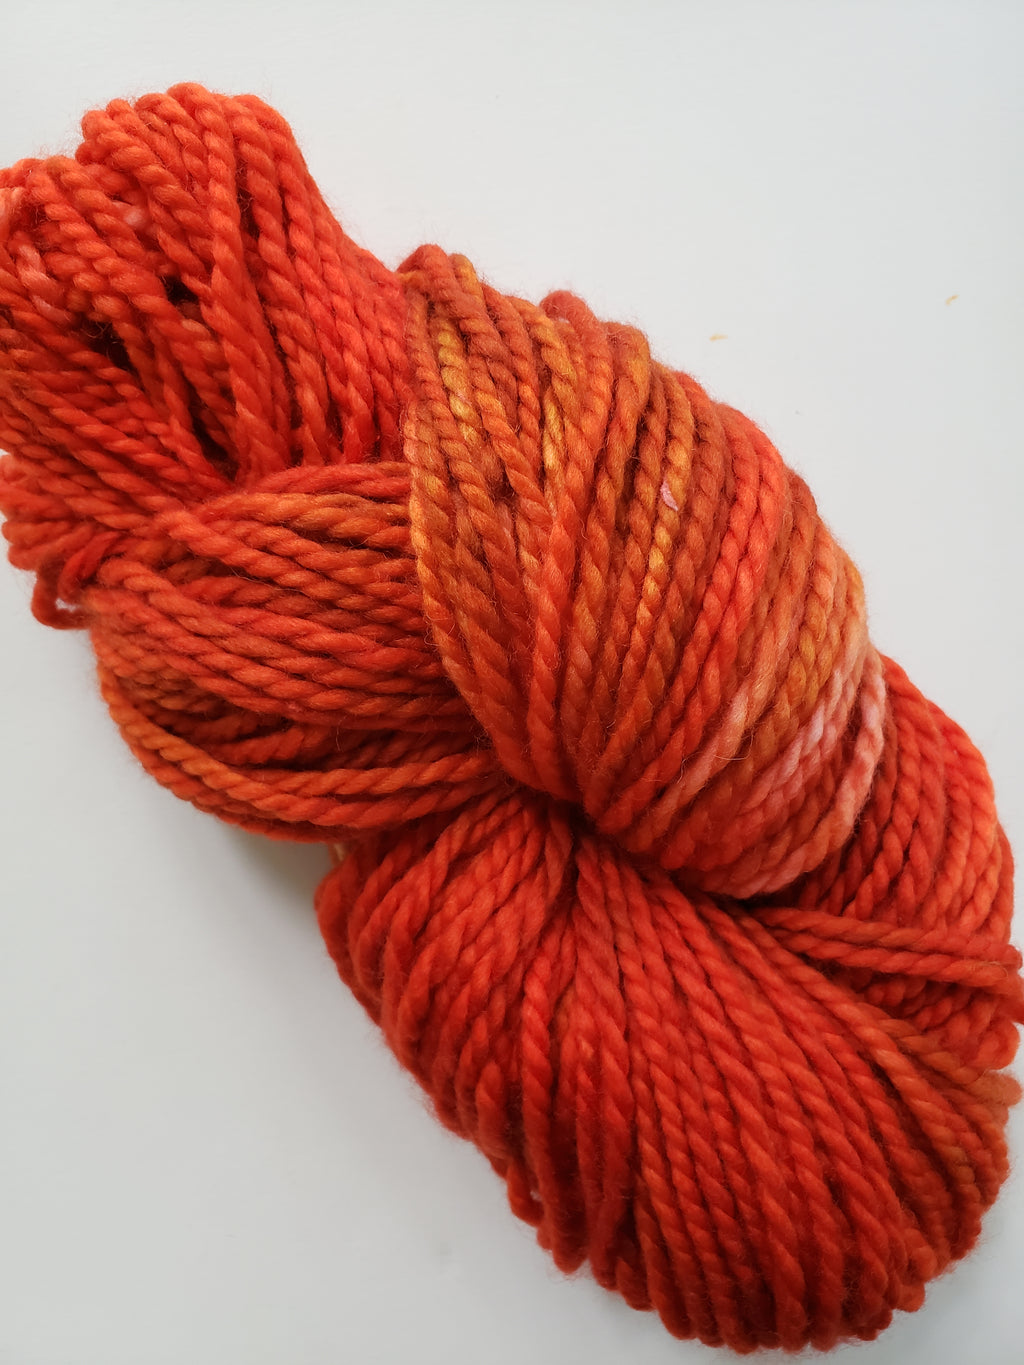 MAPLE RED - LIL TWISTY 2 PLY -  Hand Dyed Shades of Red, Orange and Caramel Worsted Yarn for Rug Hooking - RSS216